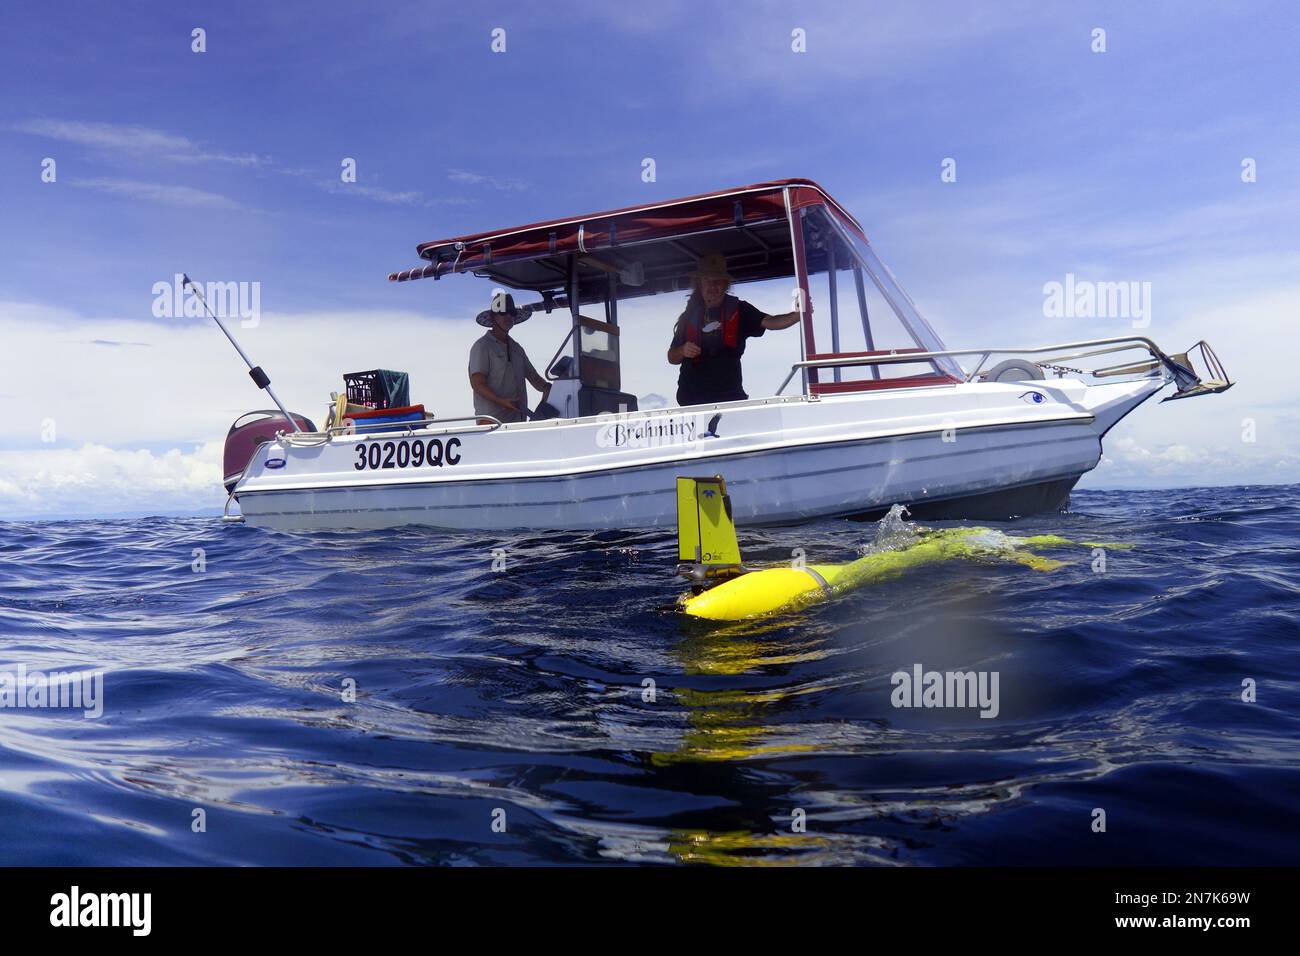 Slocum ocean glider (yellow) that has just been deployed from small charter vessel, Mission Beach, Great Barrier Reef, Queensland, Australia. No MR or Stock Photo